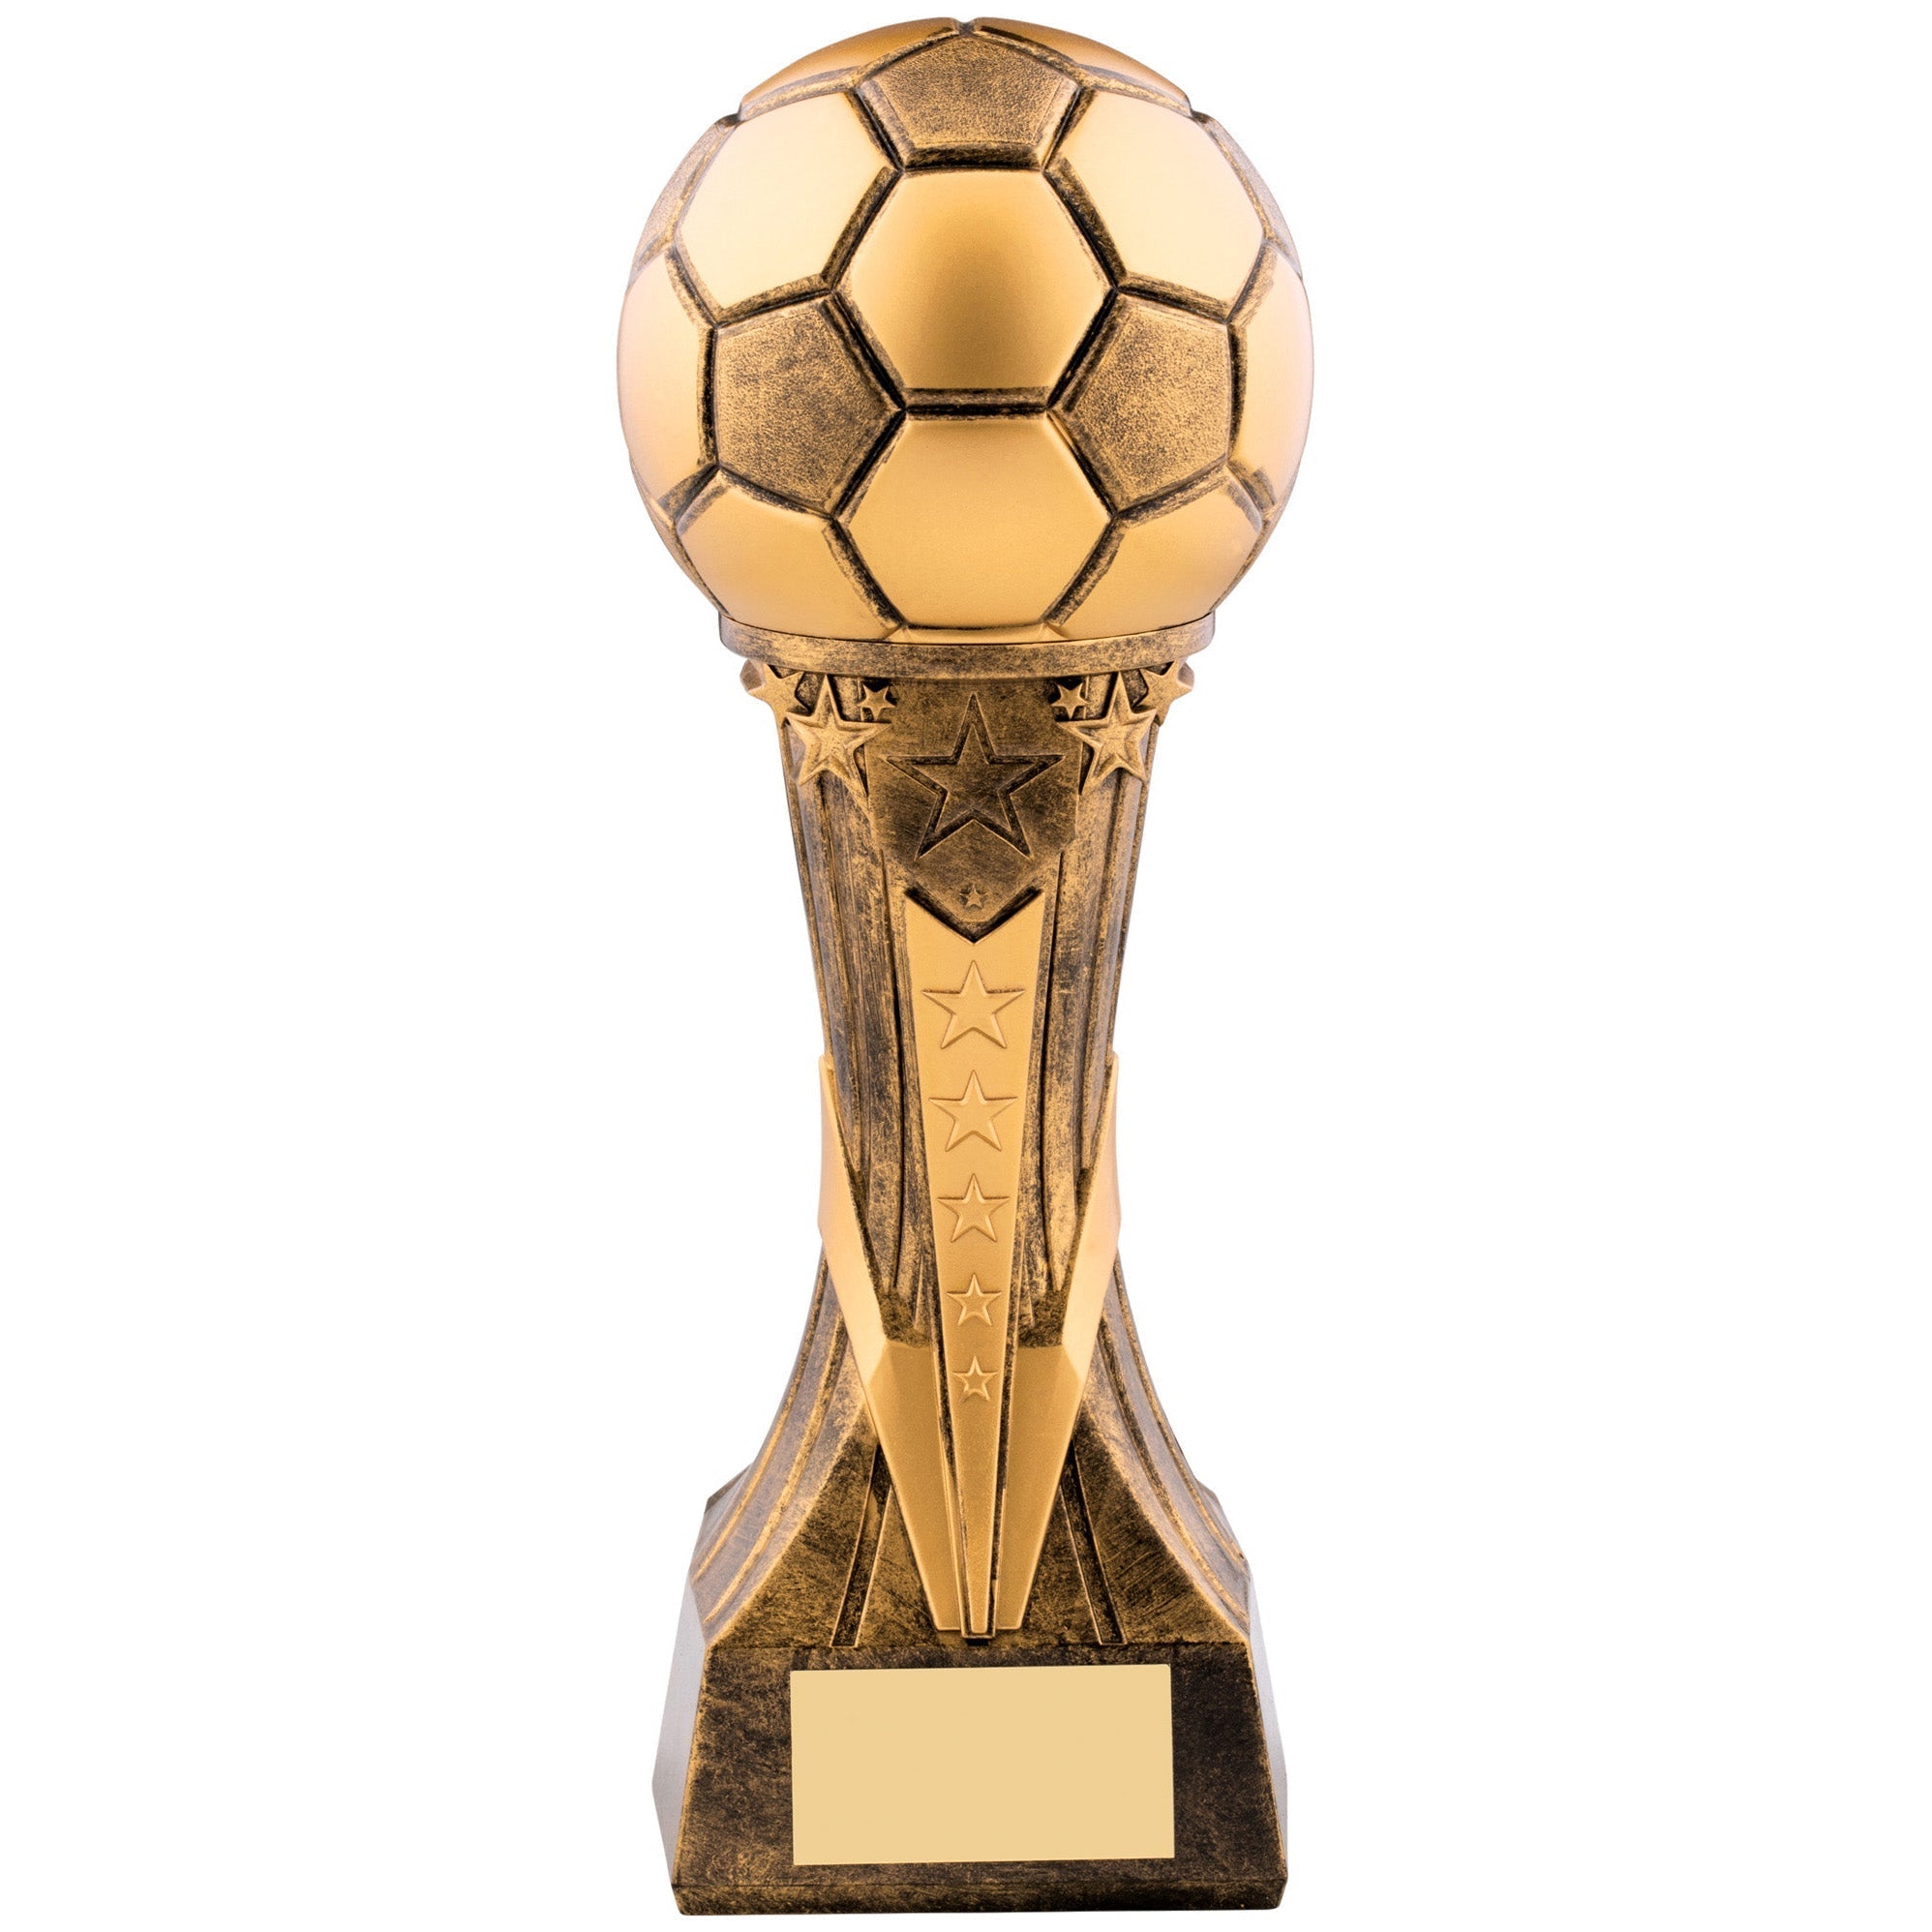 Cosmos Football Statue Trophy (CLEARANCE)